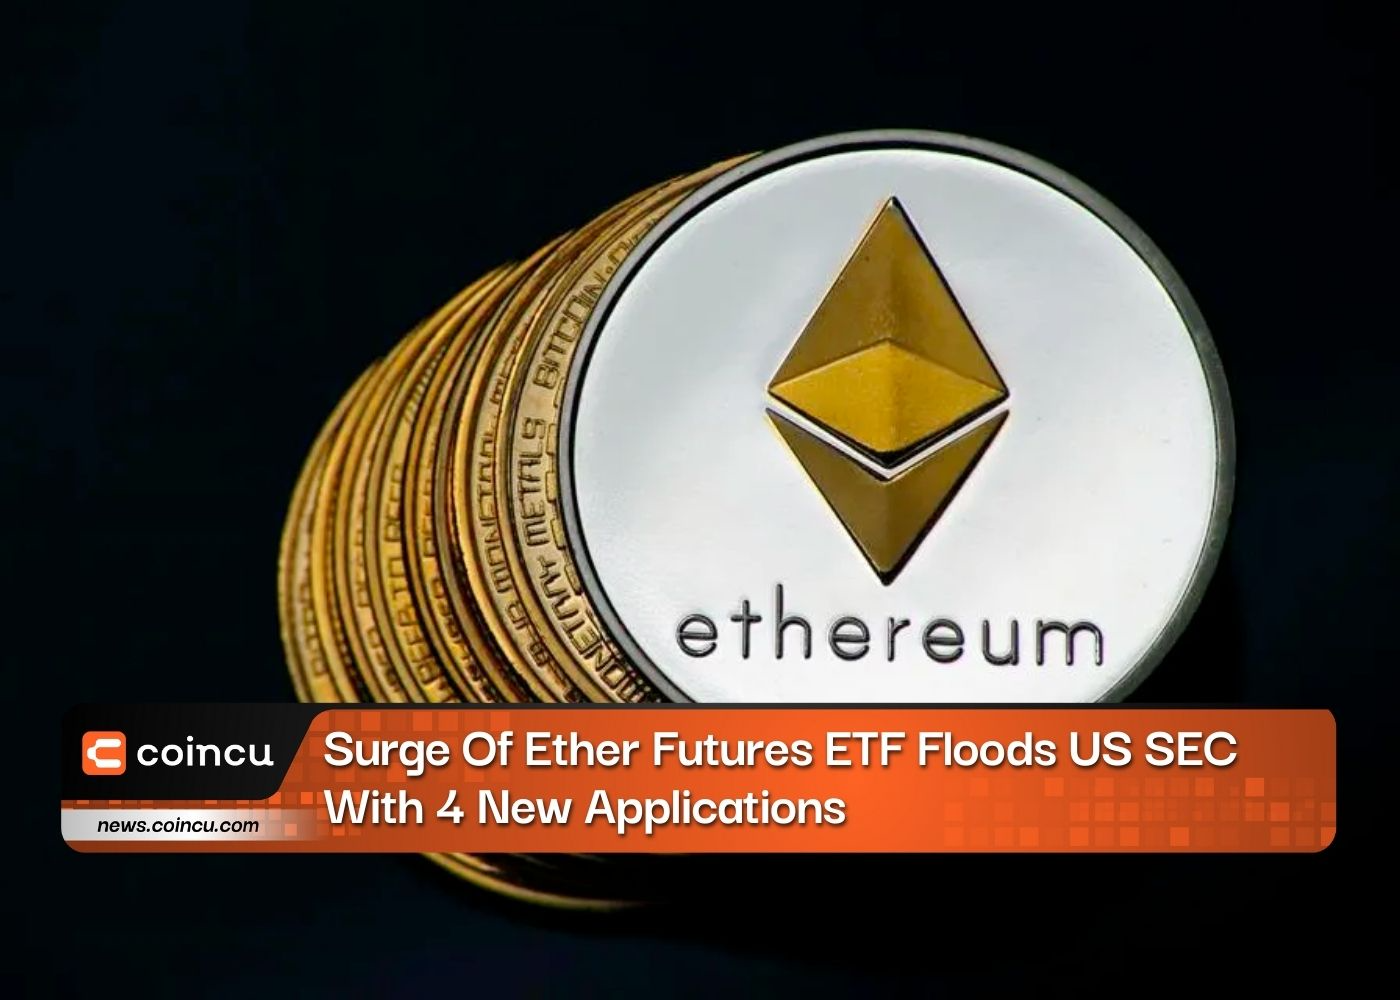 Surge Of Ether Futures ETF Floods US SEC With 3 New Applications